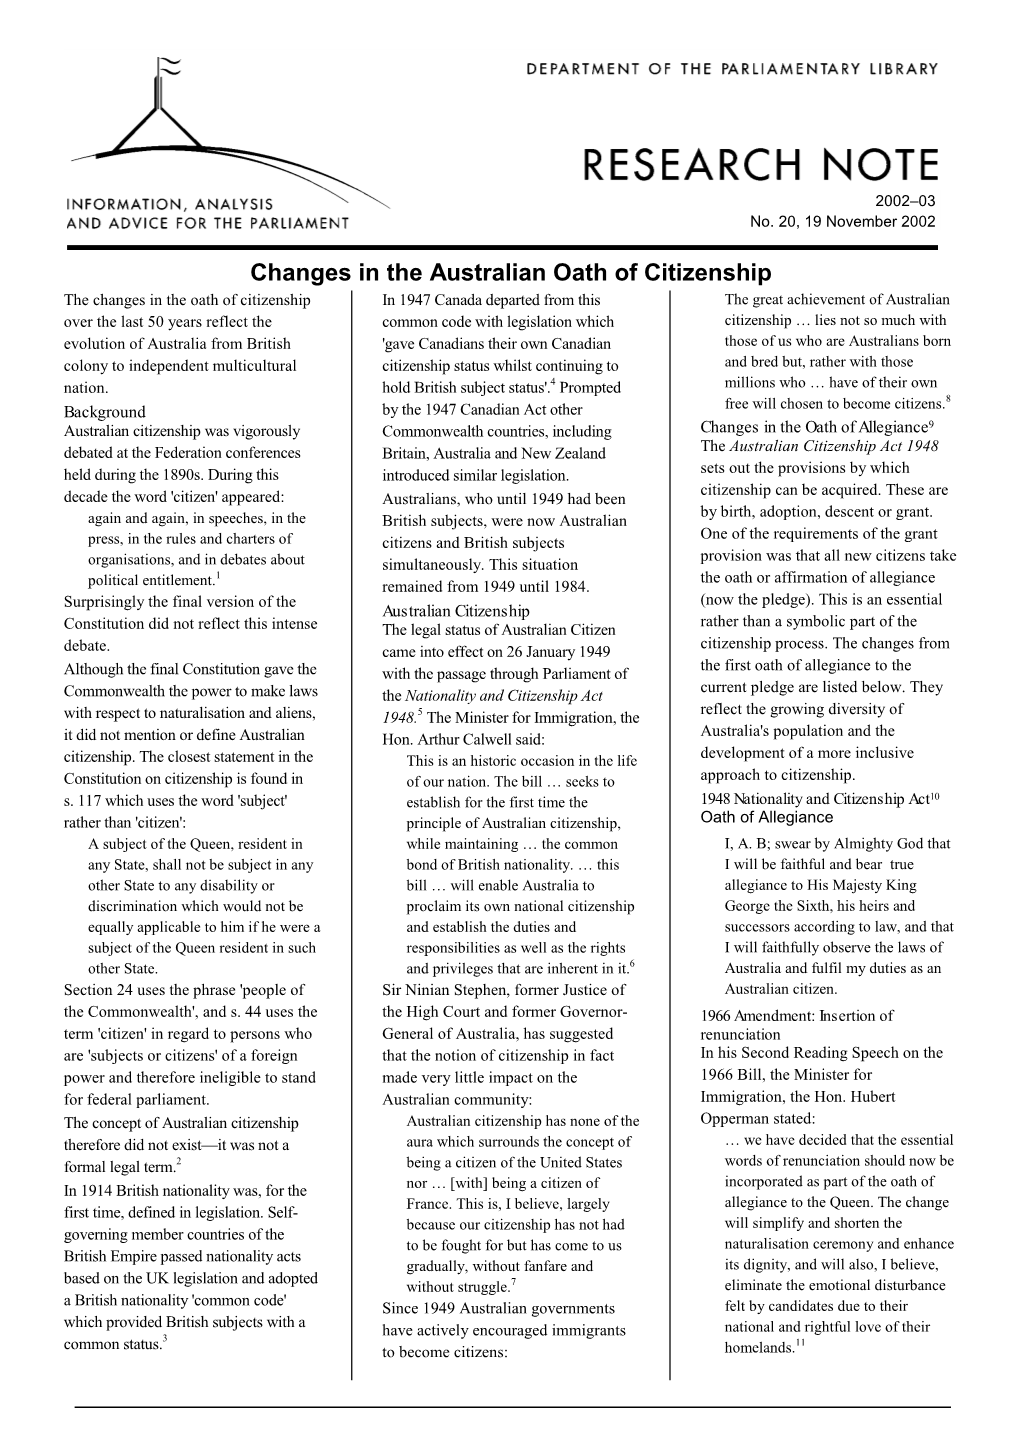 Changes in the Australian Oath of Citizenship